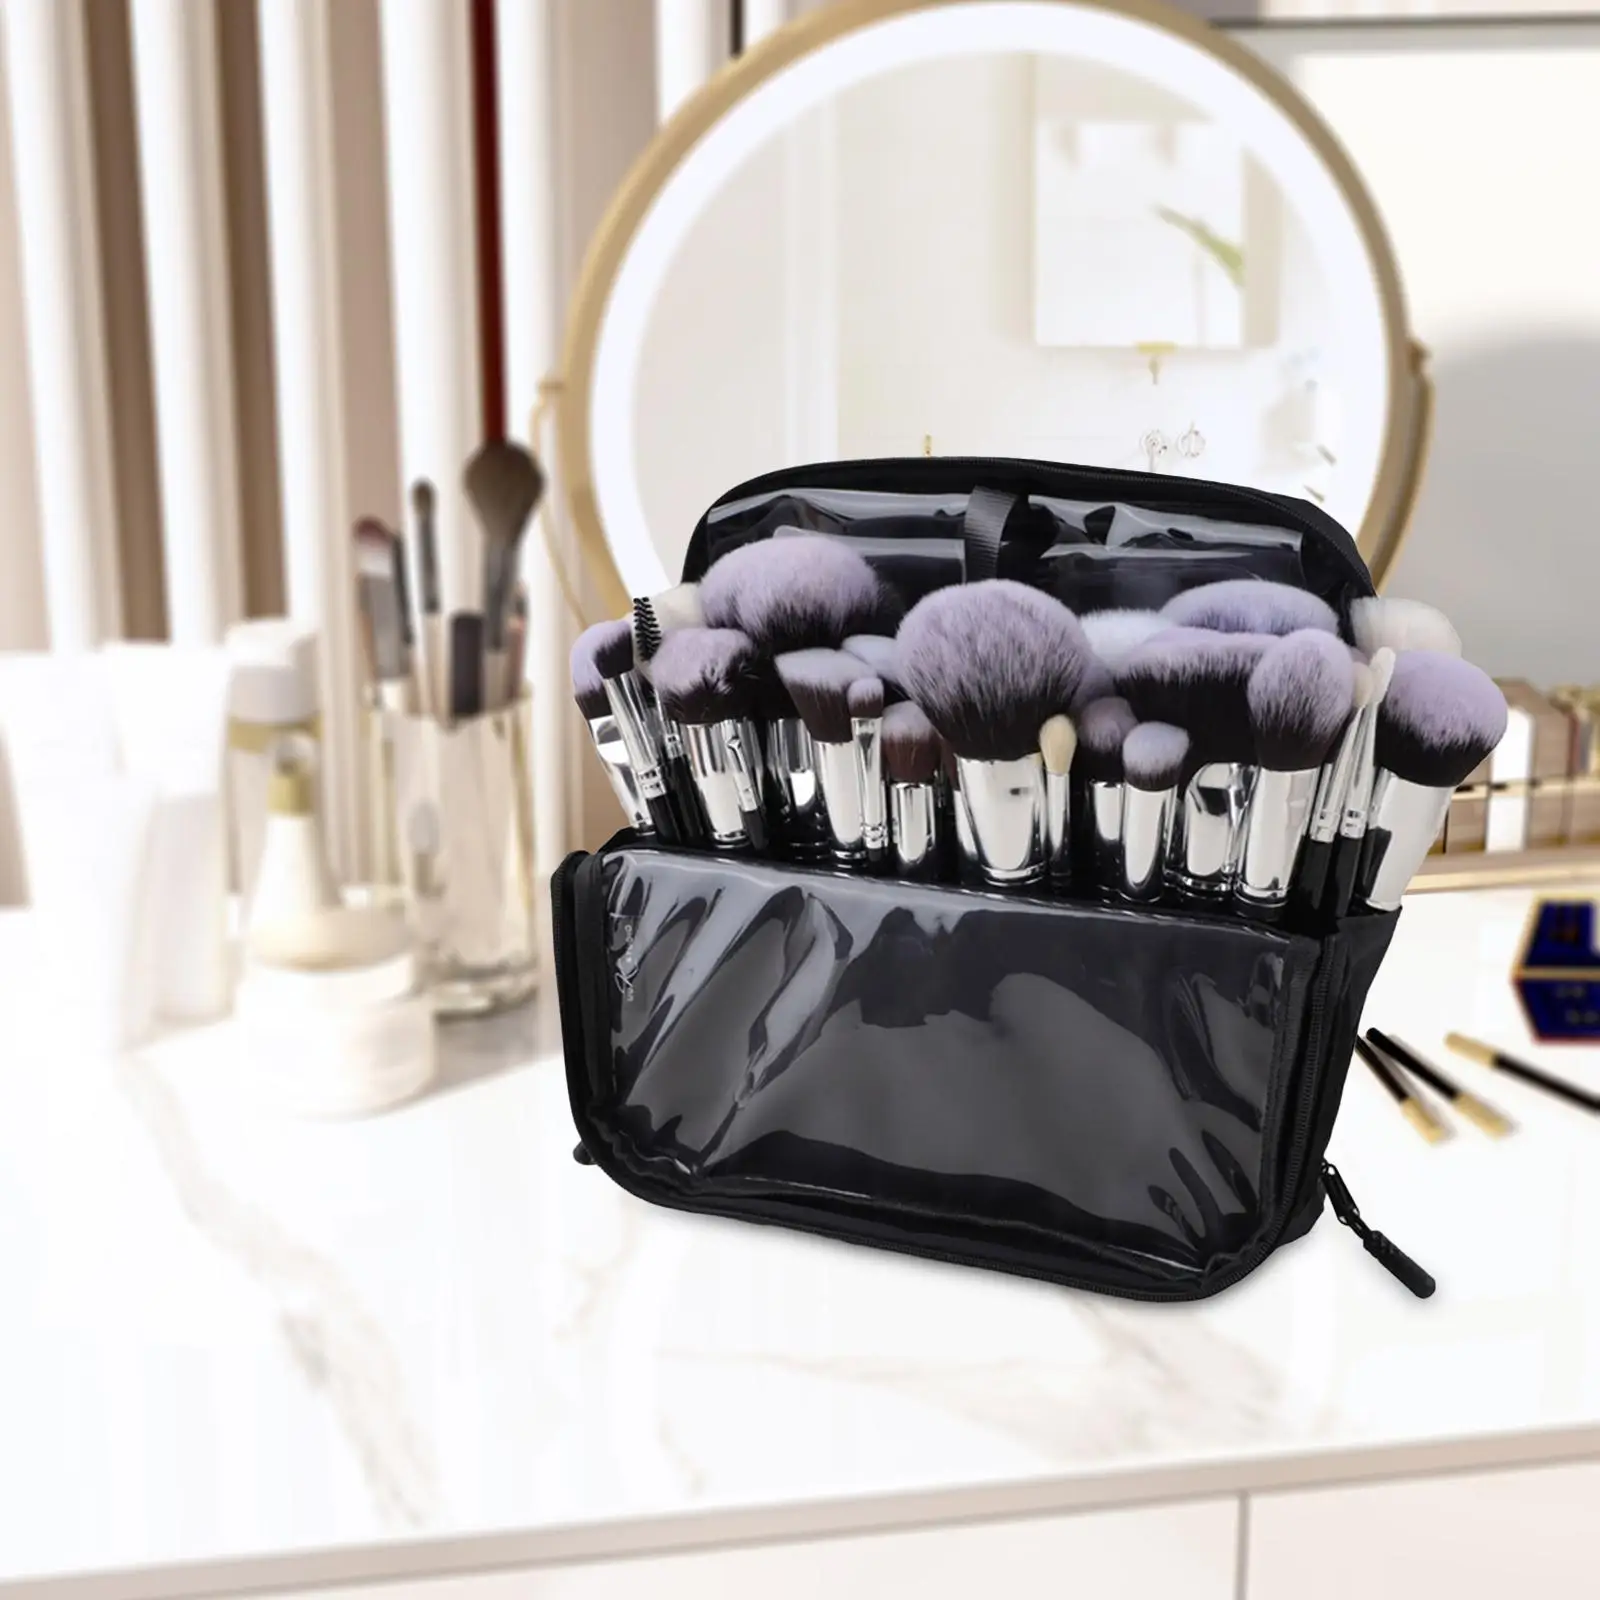 Makeup Brush Organzier Bag Foldable Stand up Durable Zipper Large Cosmetic Bag for Cleaning Brushes Makeup Artists